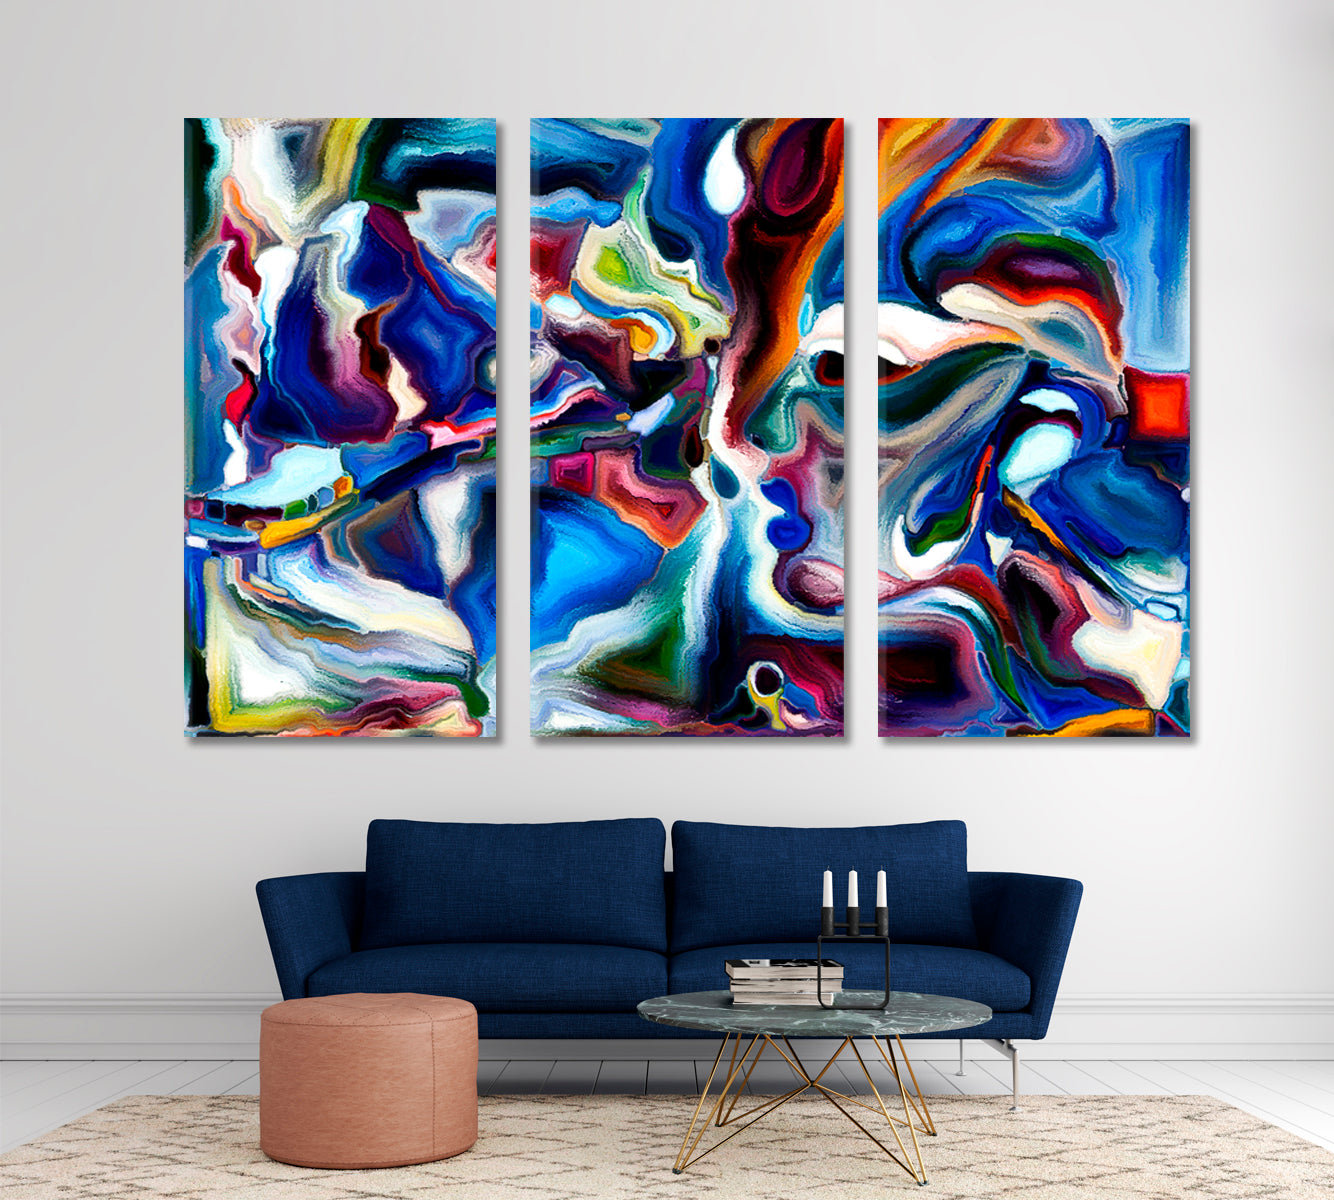 Life Inside a Painting Abstract Art Print Artesty 3 panels 36" x 24" 